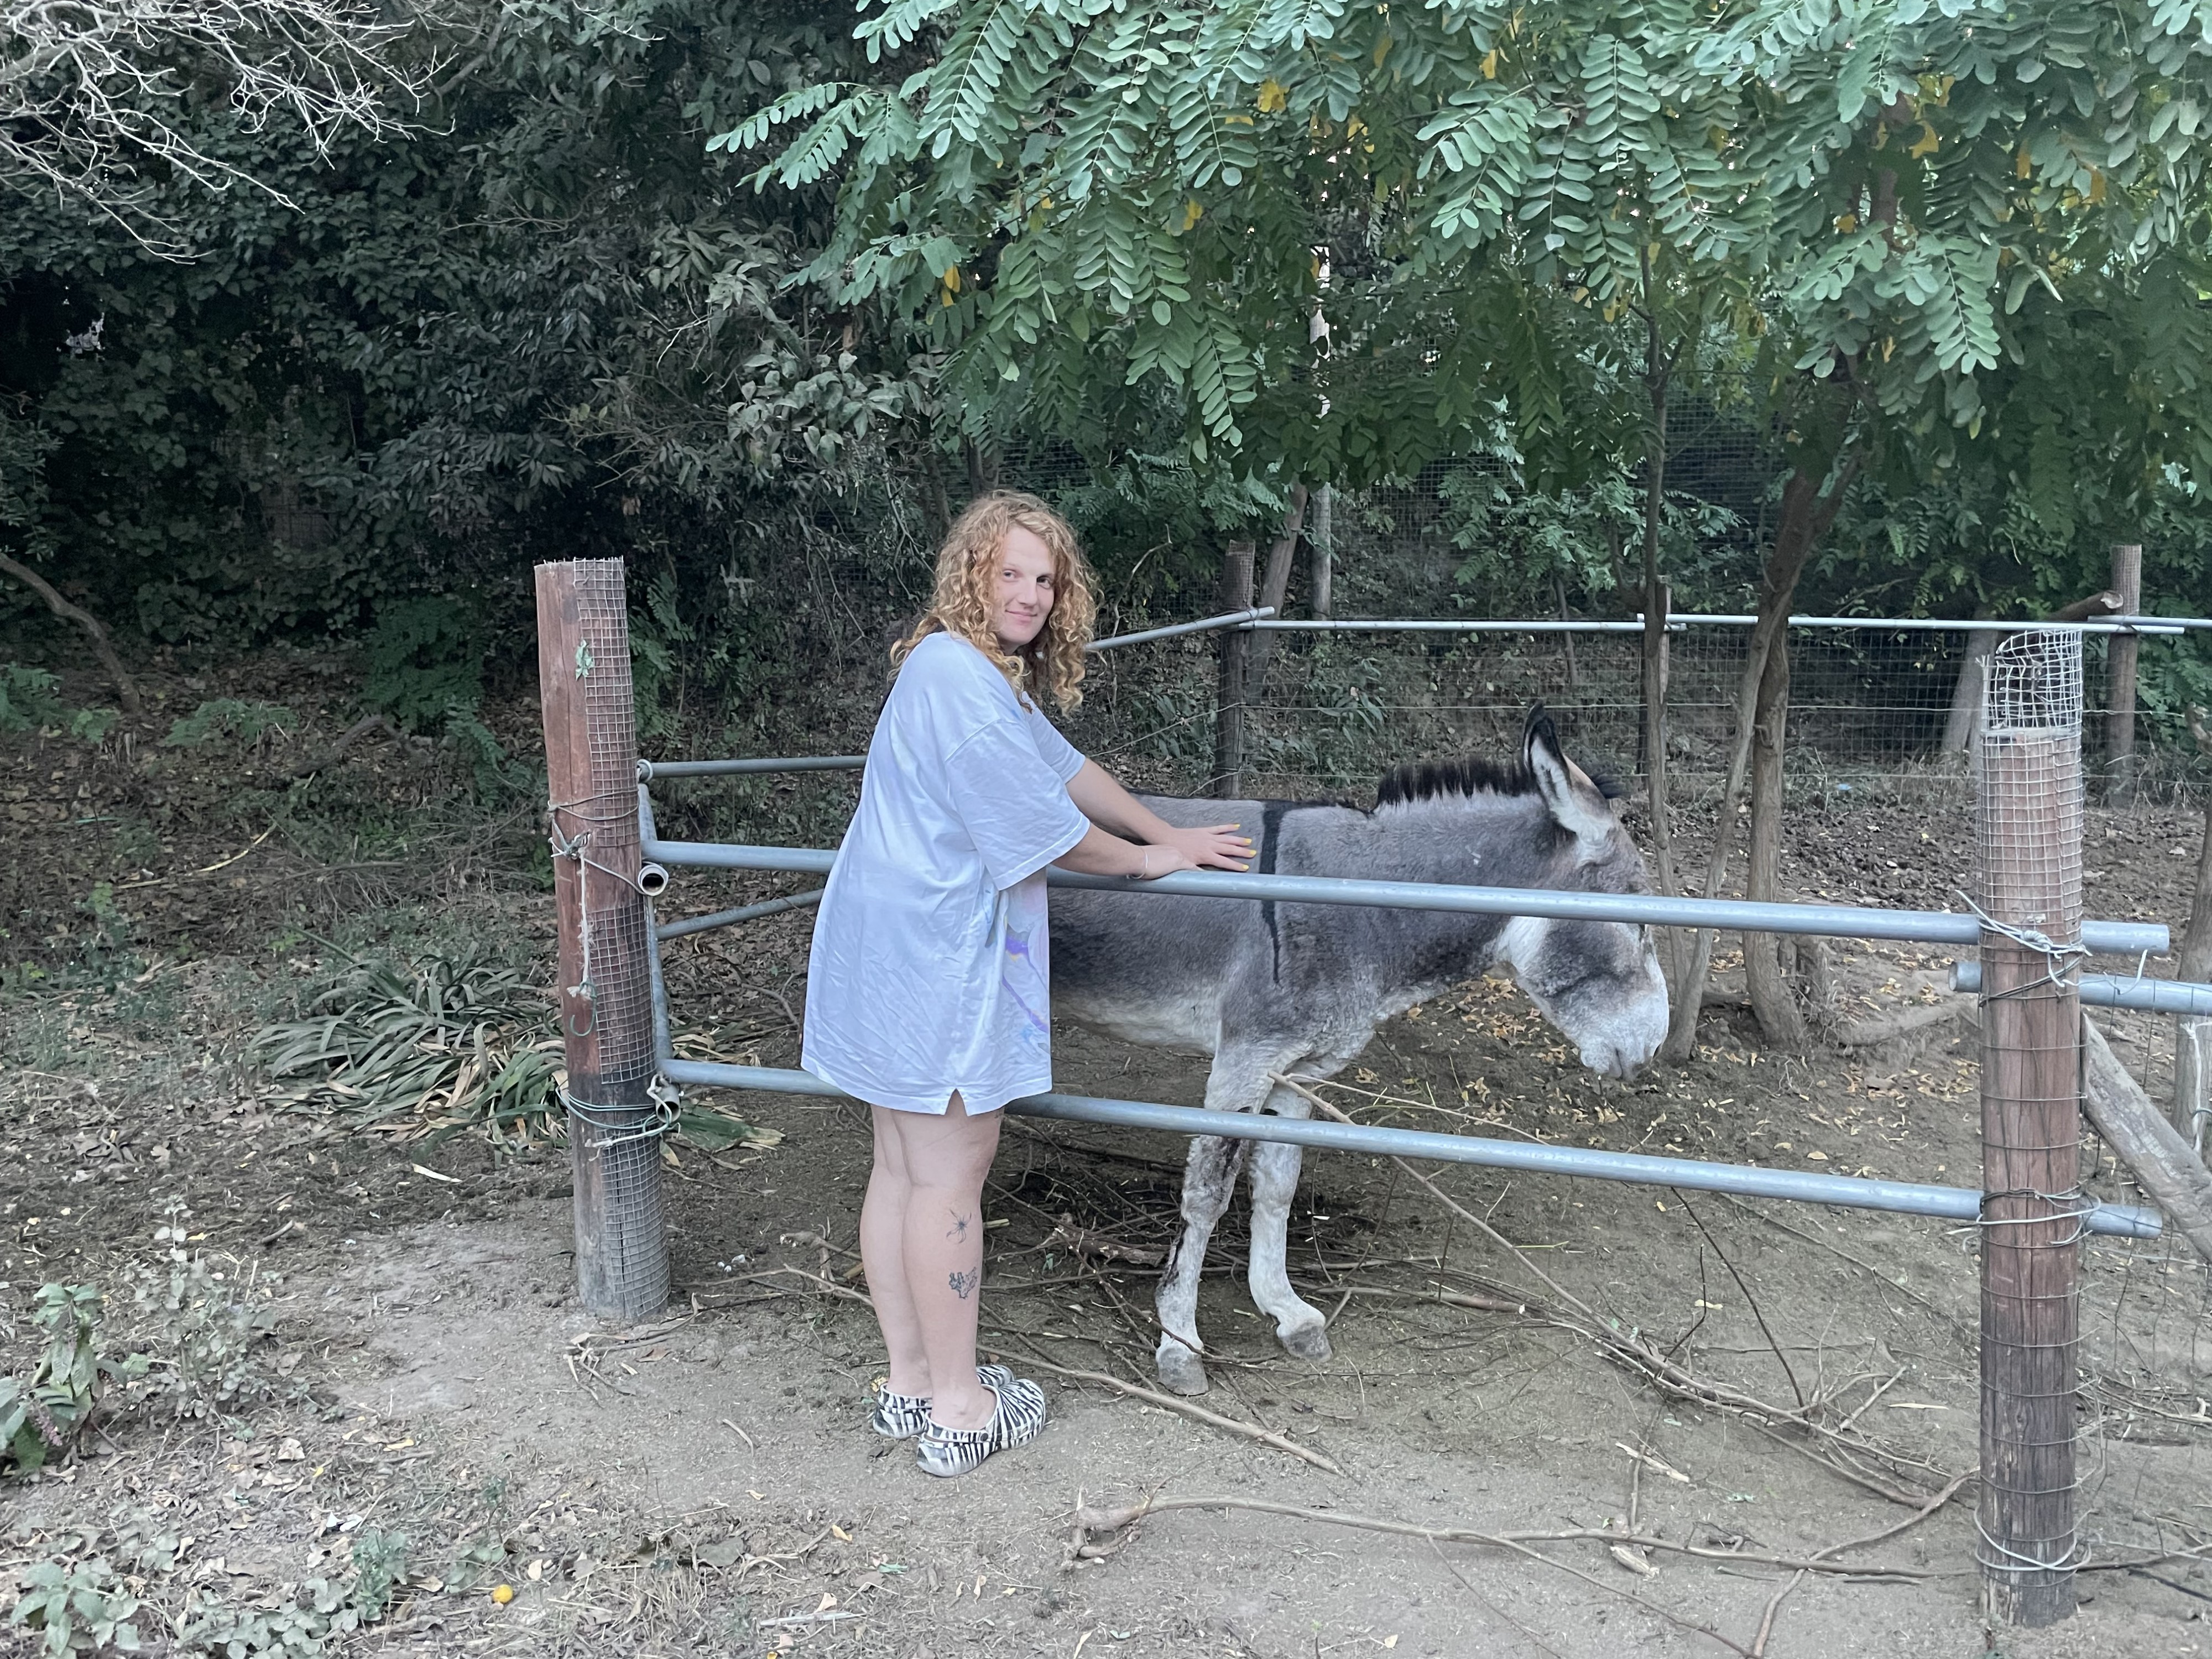 Nora Treatbaby is shown mid-frame petting a donkey behind a fence. She is wearing a white t-shirt dress and zebra crocs. Her back is to the camera but she is turning around to face the camera and is smiling.